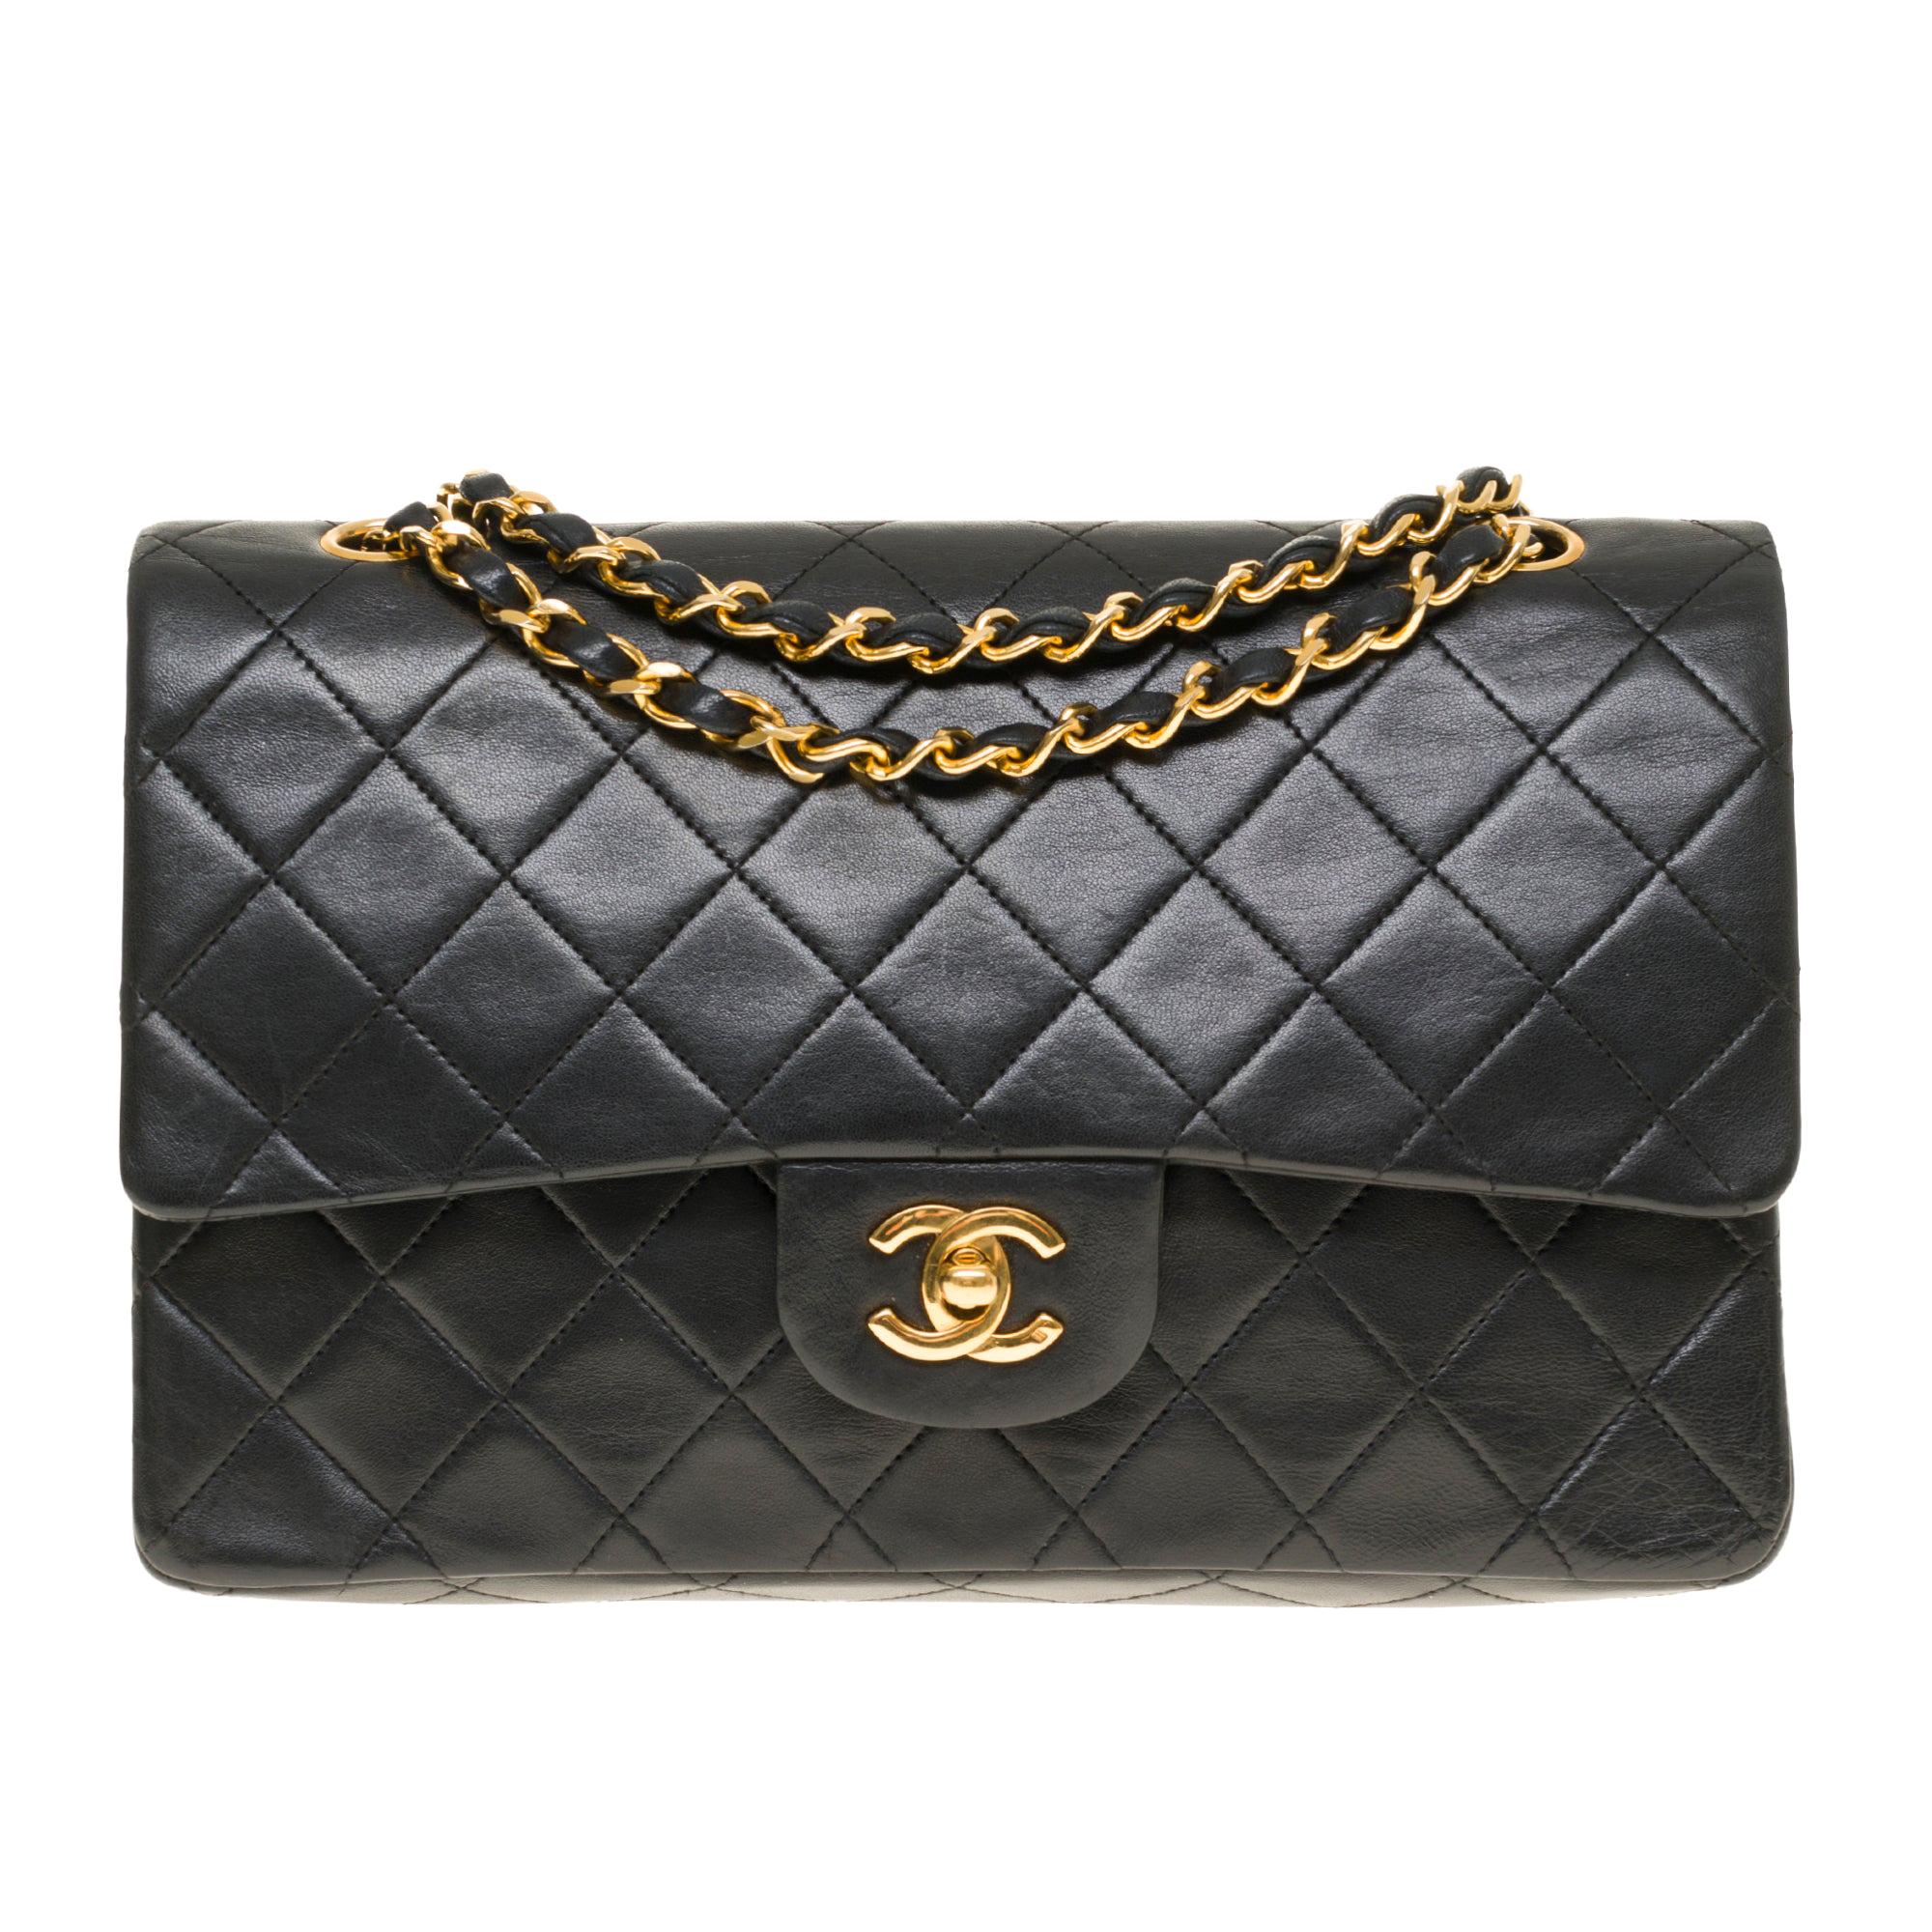 The Classy Chanel Timeless Medium Shoulder bag in black quilted lambskin and GHW